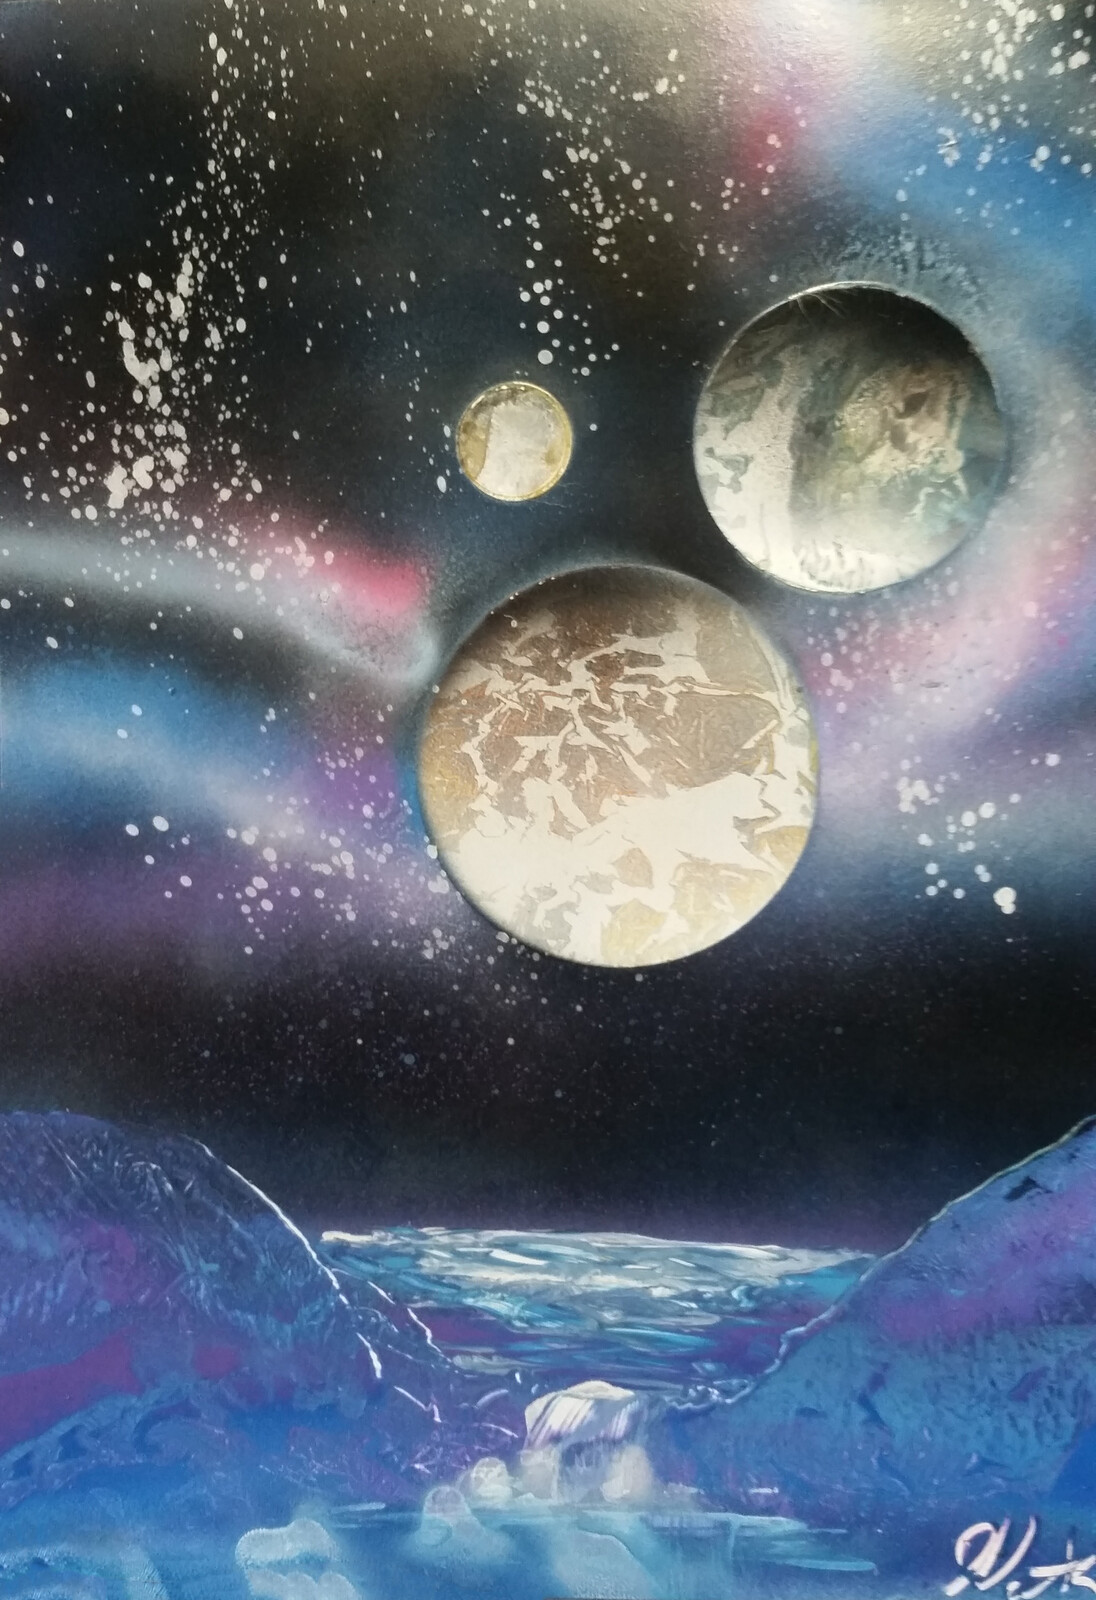 Speed Painting - Spray paint on poster board 12x22